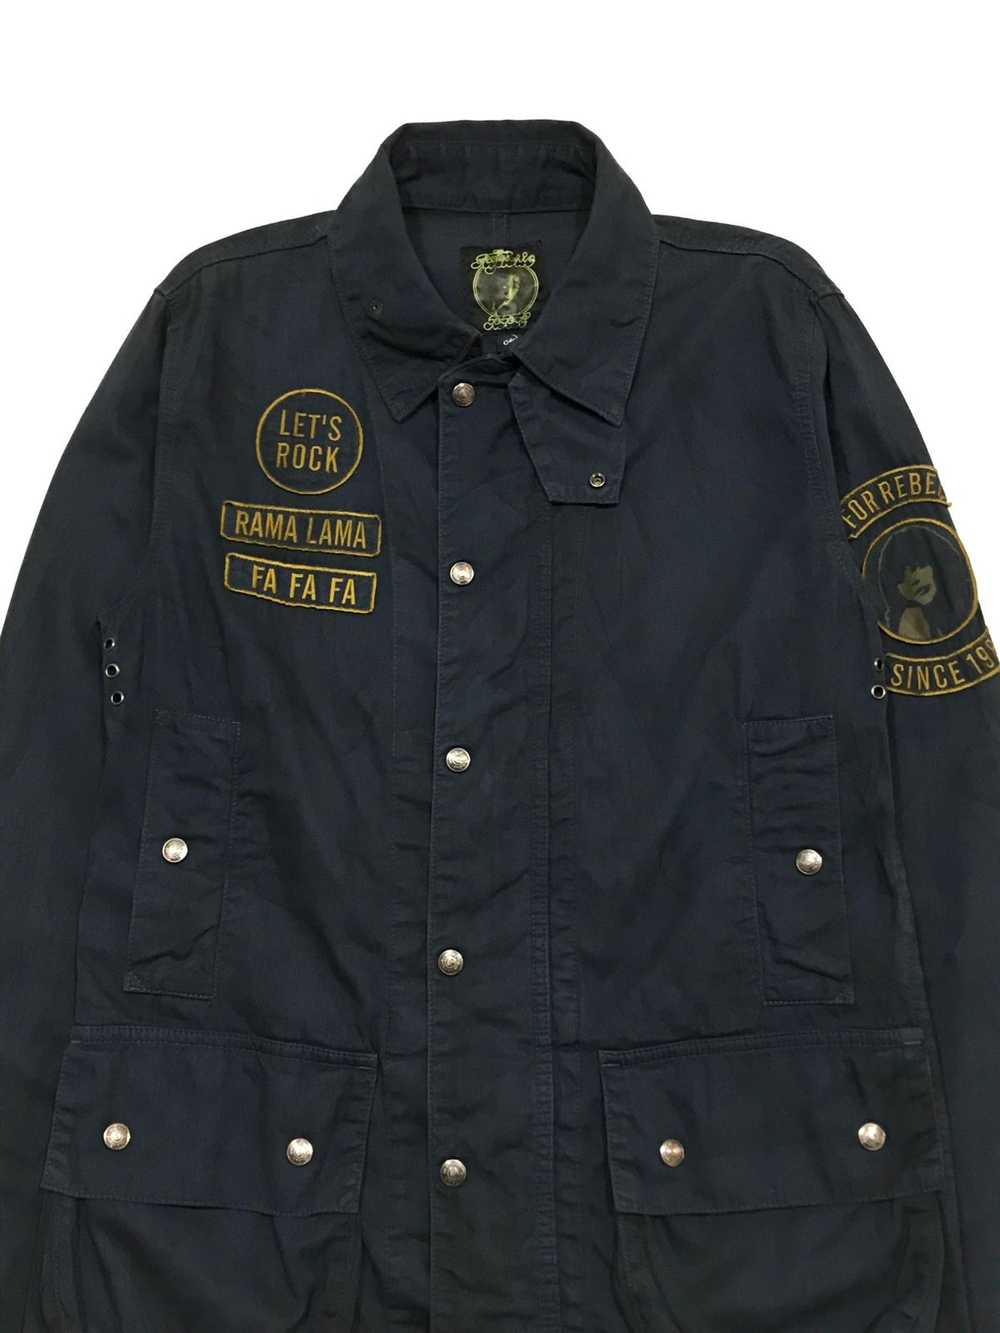 Hysteric Glamour HG “Dirty” Oil Spilled Jacket - image 3